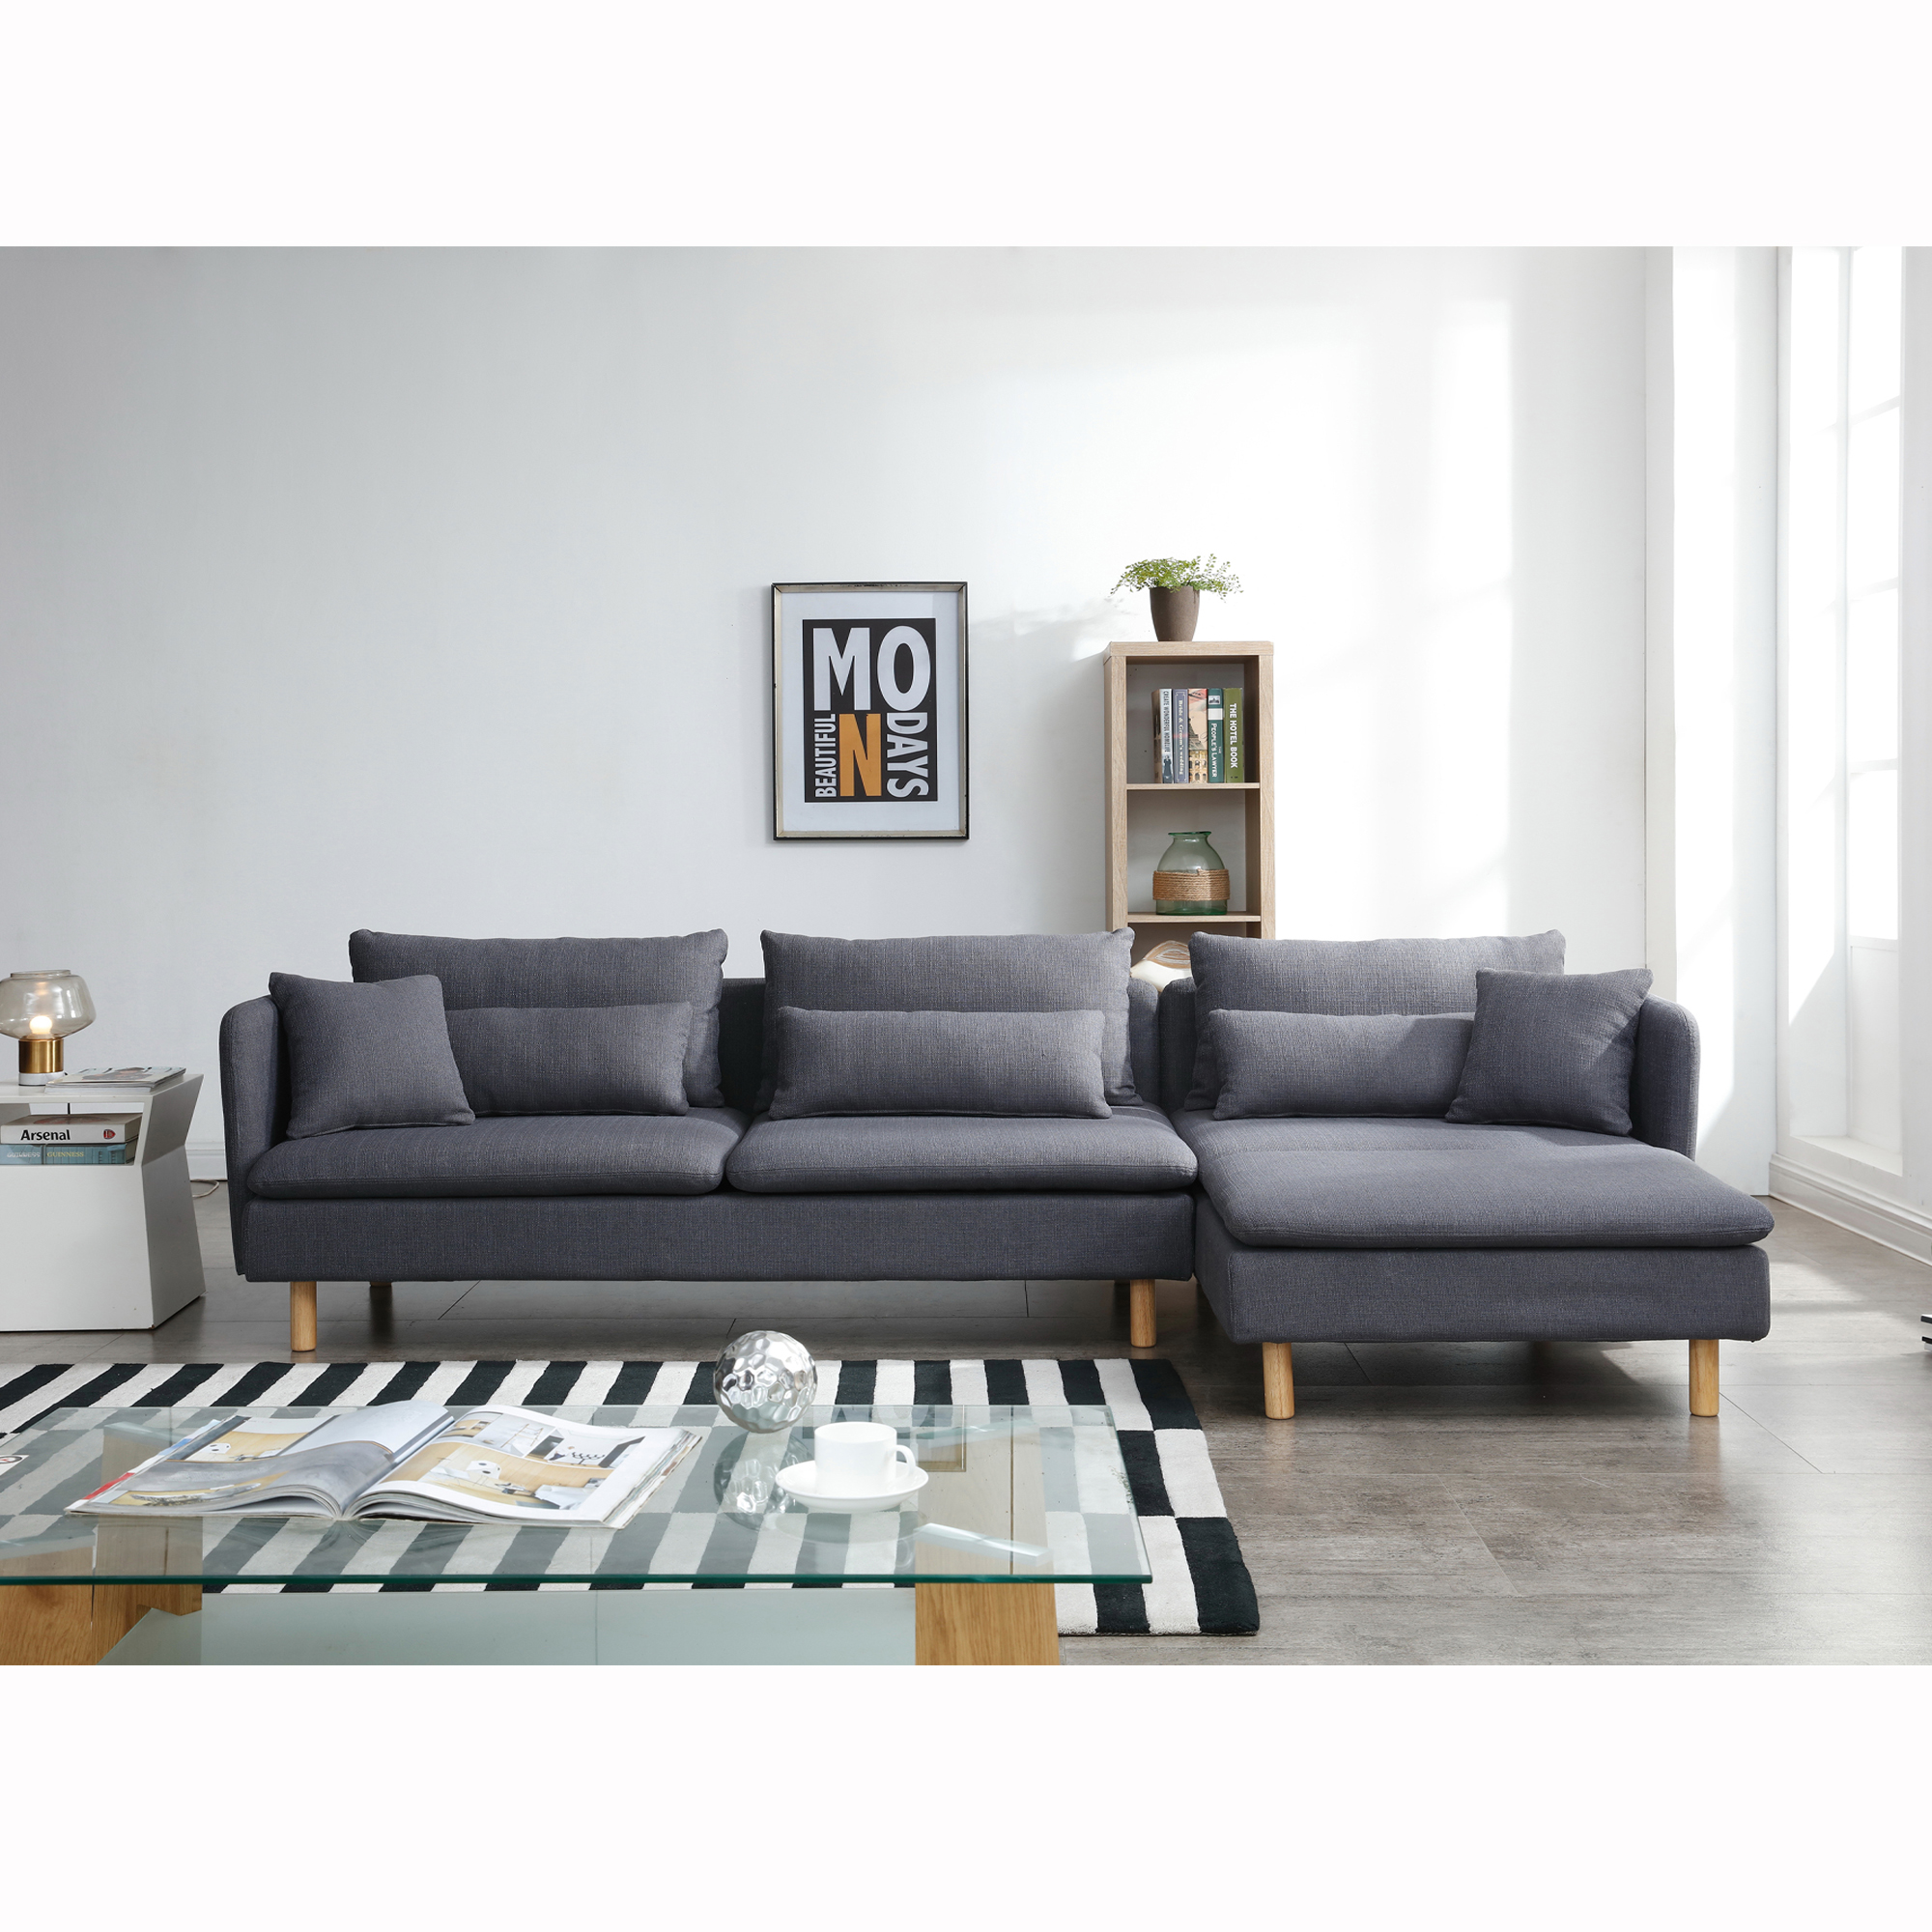 Modern Living Room Sectional Sofa Couch Convertible L Shape Chaise Sofa with Removable Cushions Grey Fabric-CASAINC